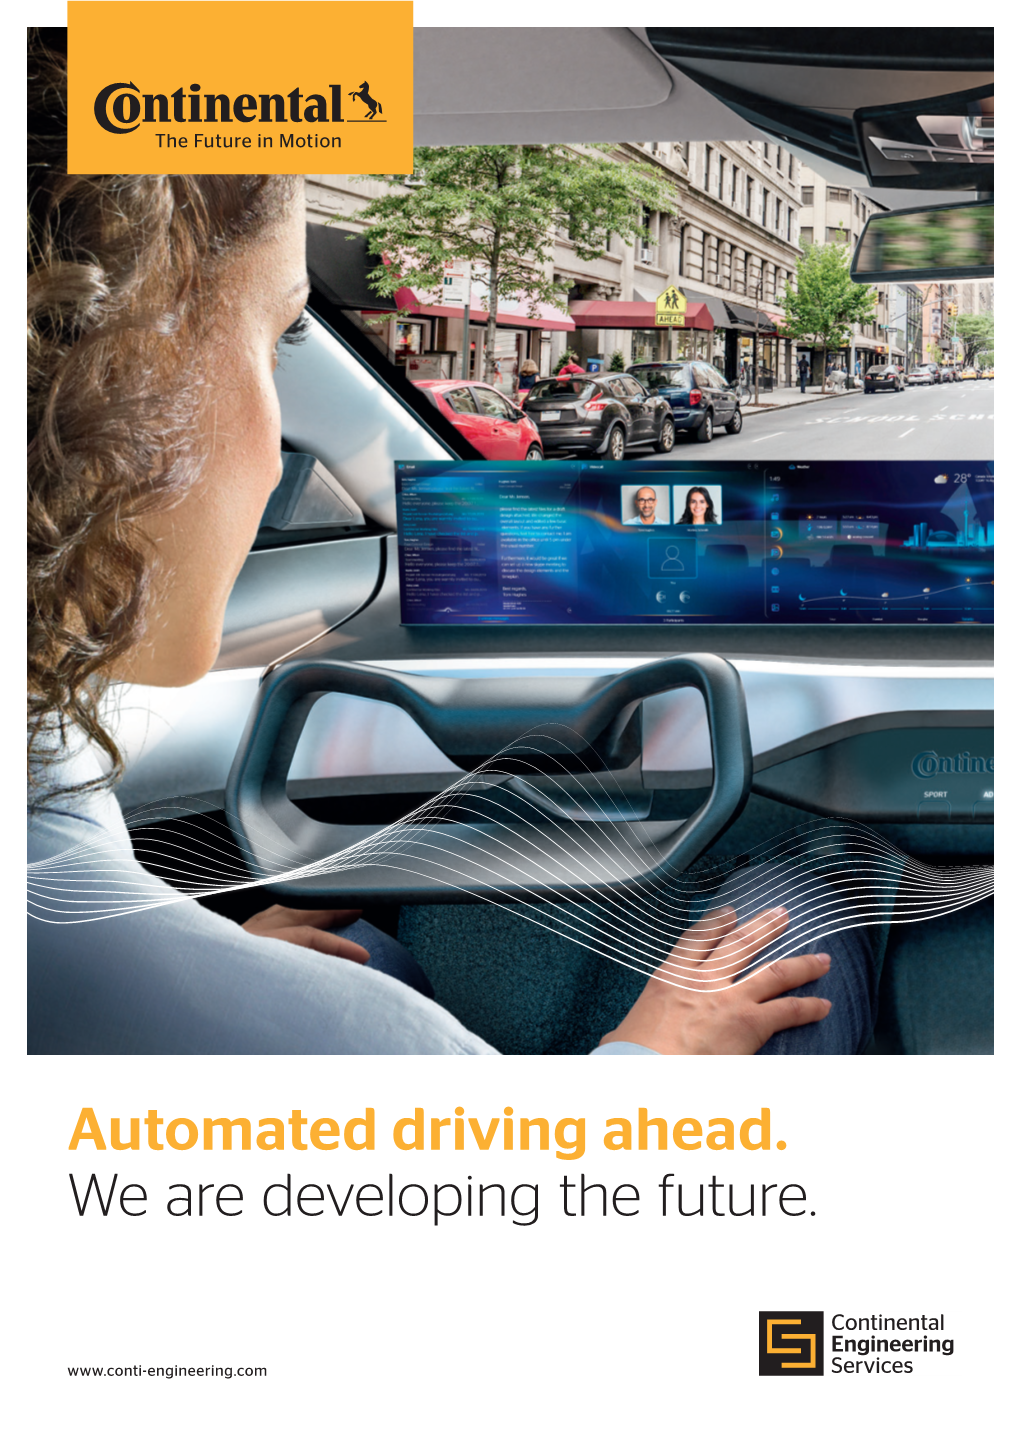 Automated Driving Ahead. We Are Developing the Future